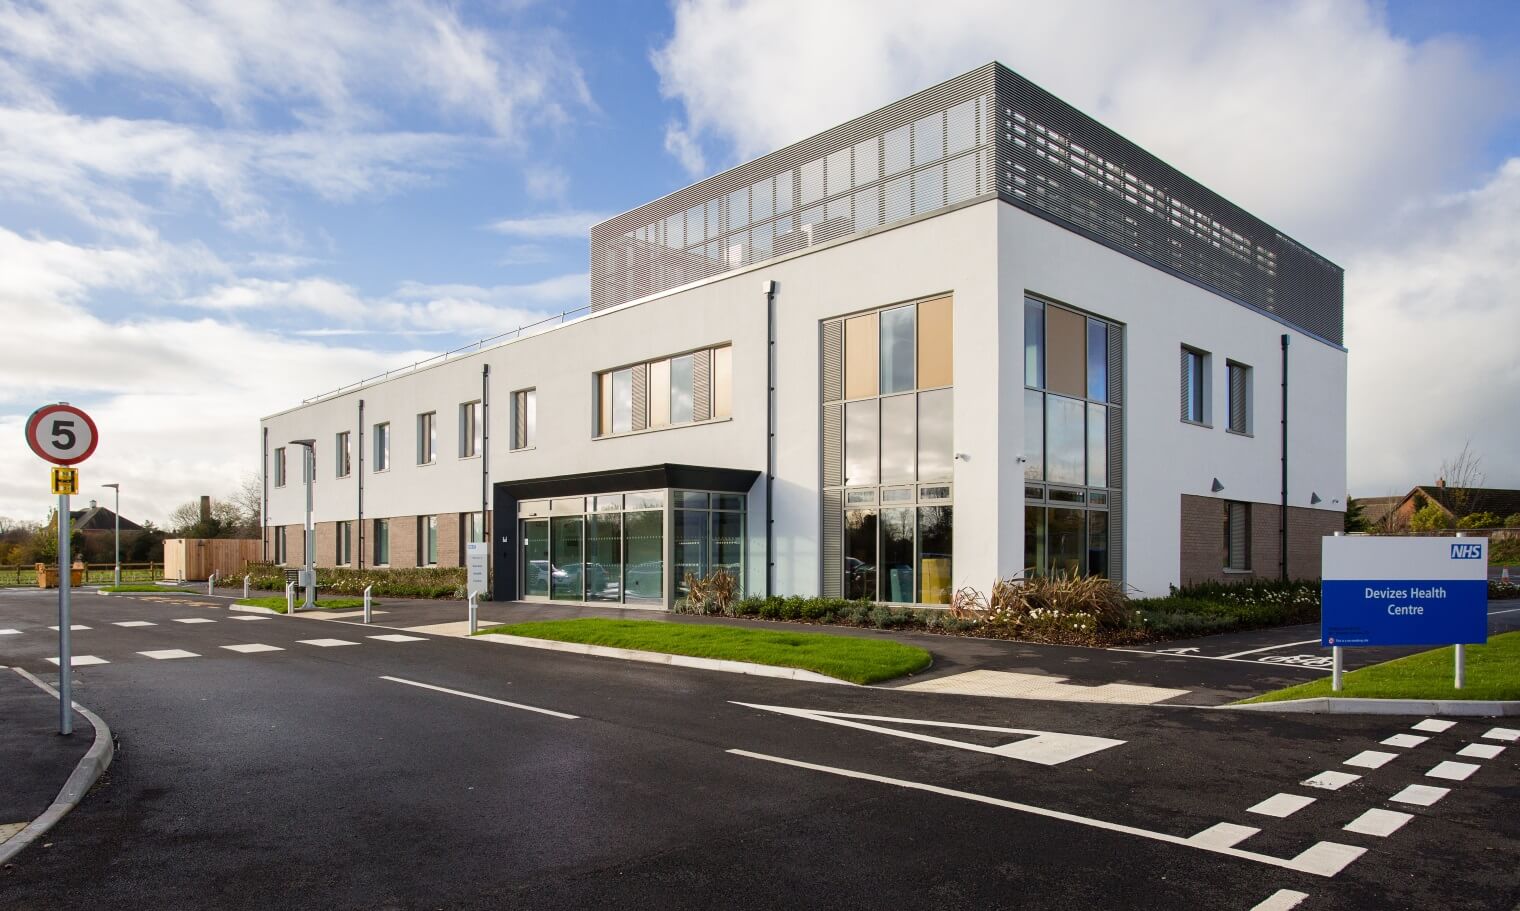 The new two-storey Devizes Health Centre in Wiltshire. The building is one of the country's first net-zero integrated care centres, setting a new standard for health care infrastructure nationwide.